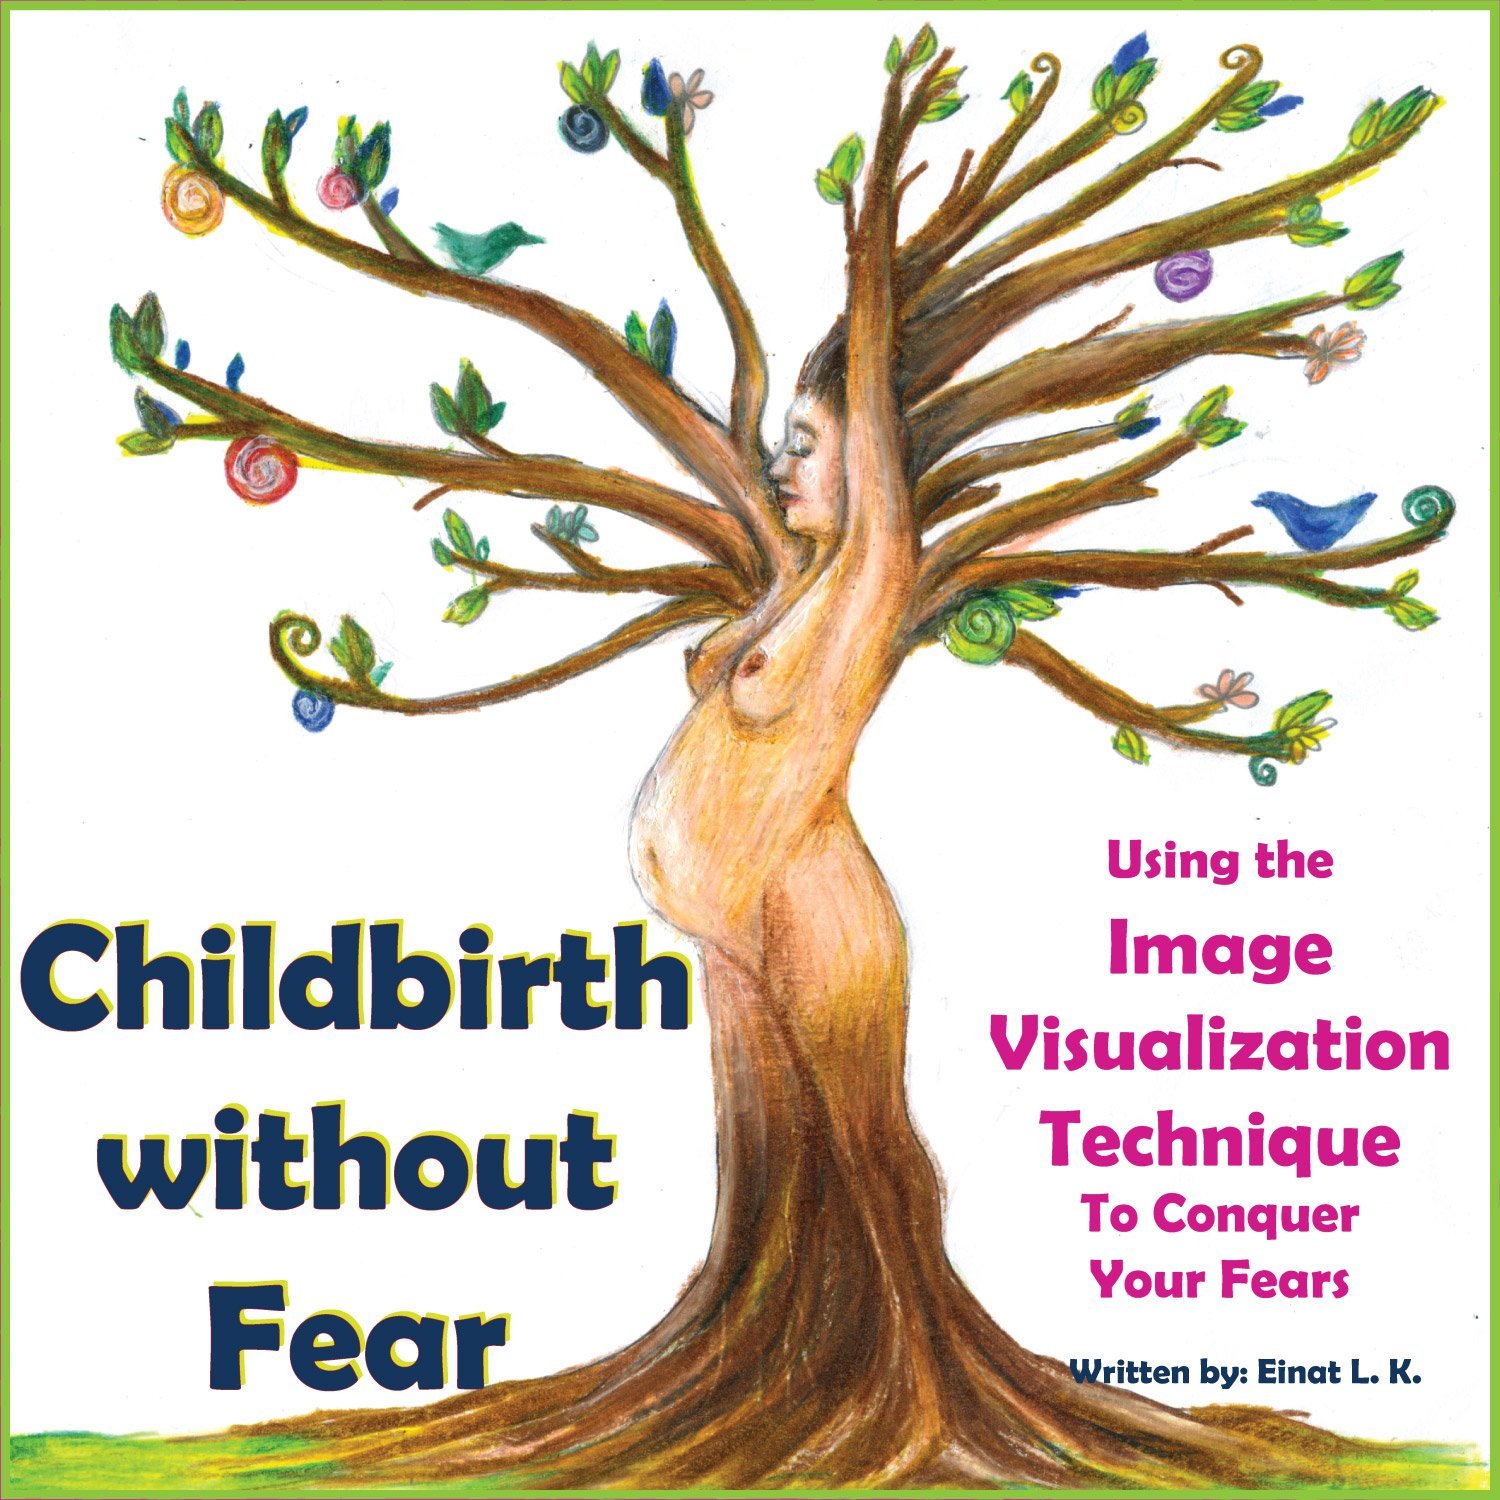 Childbirth Without Fear by Einat L. K.